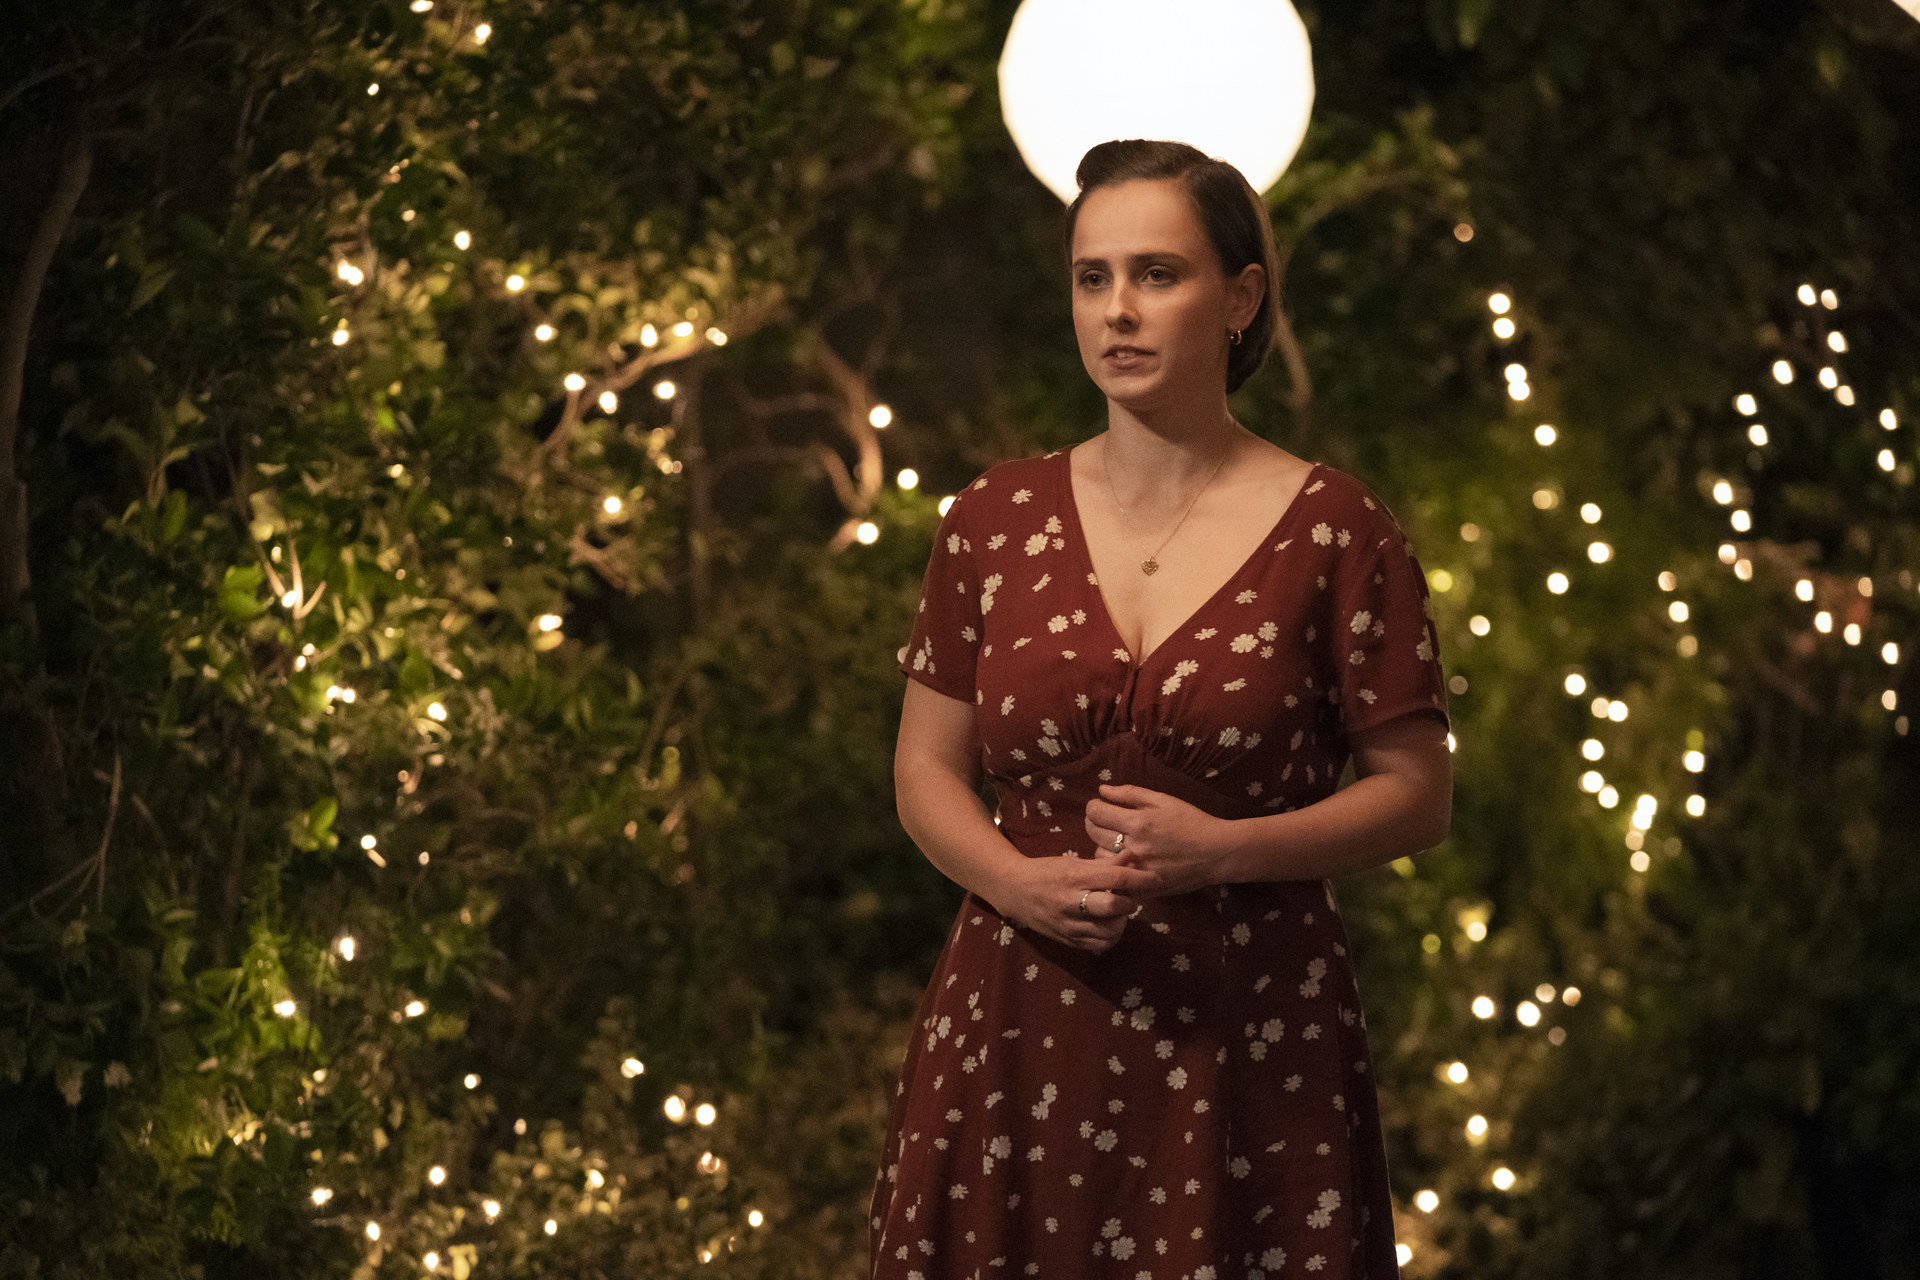 A white teenage girl in a red dress stands in front of bushes with lights in them